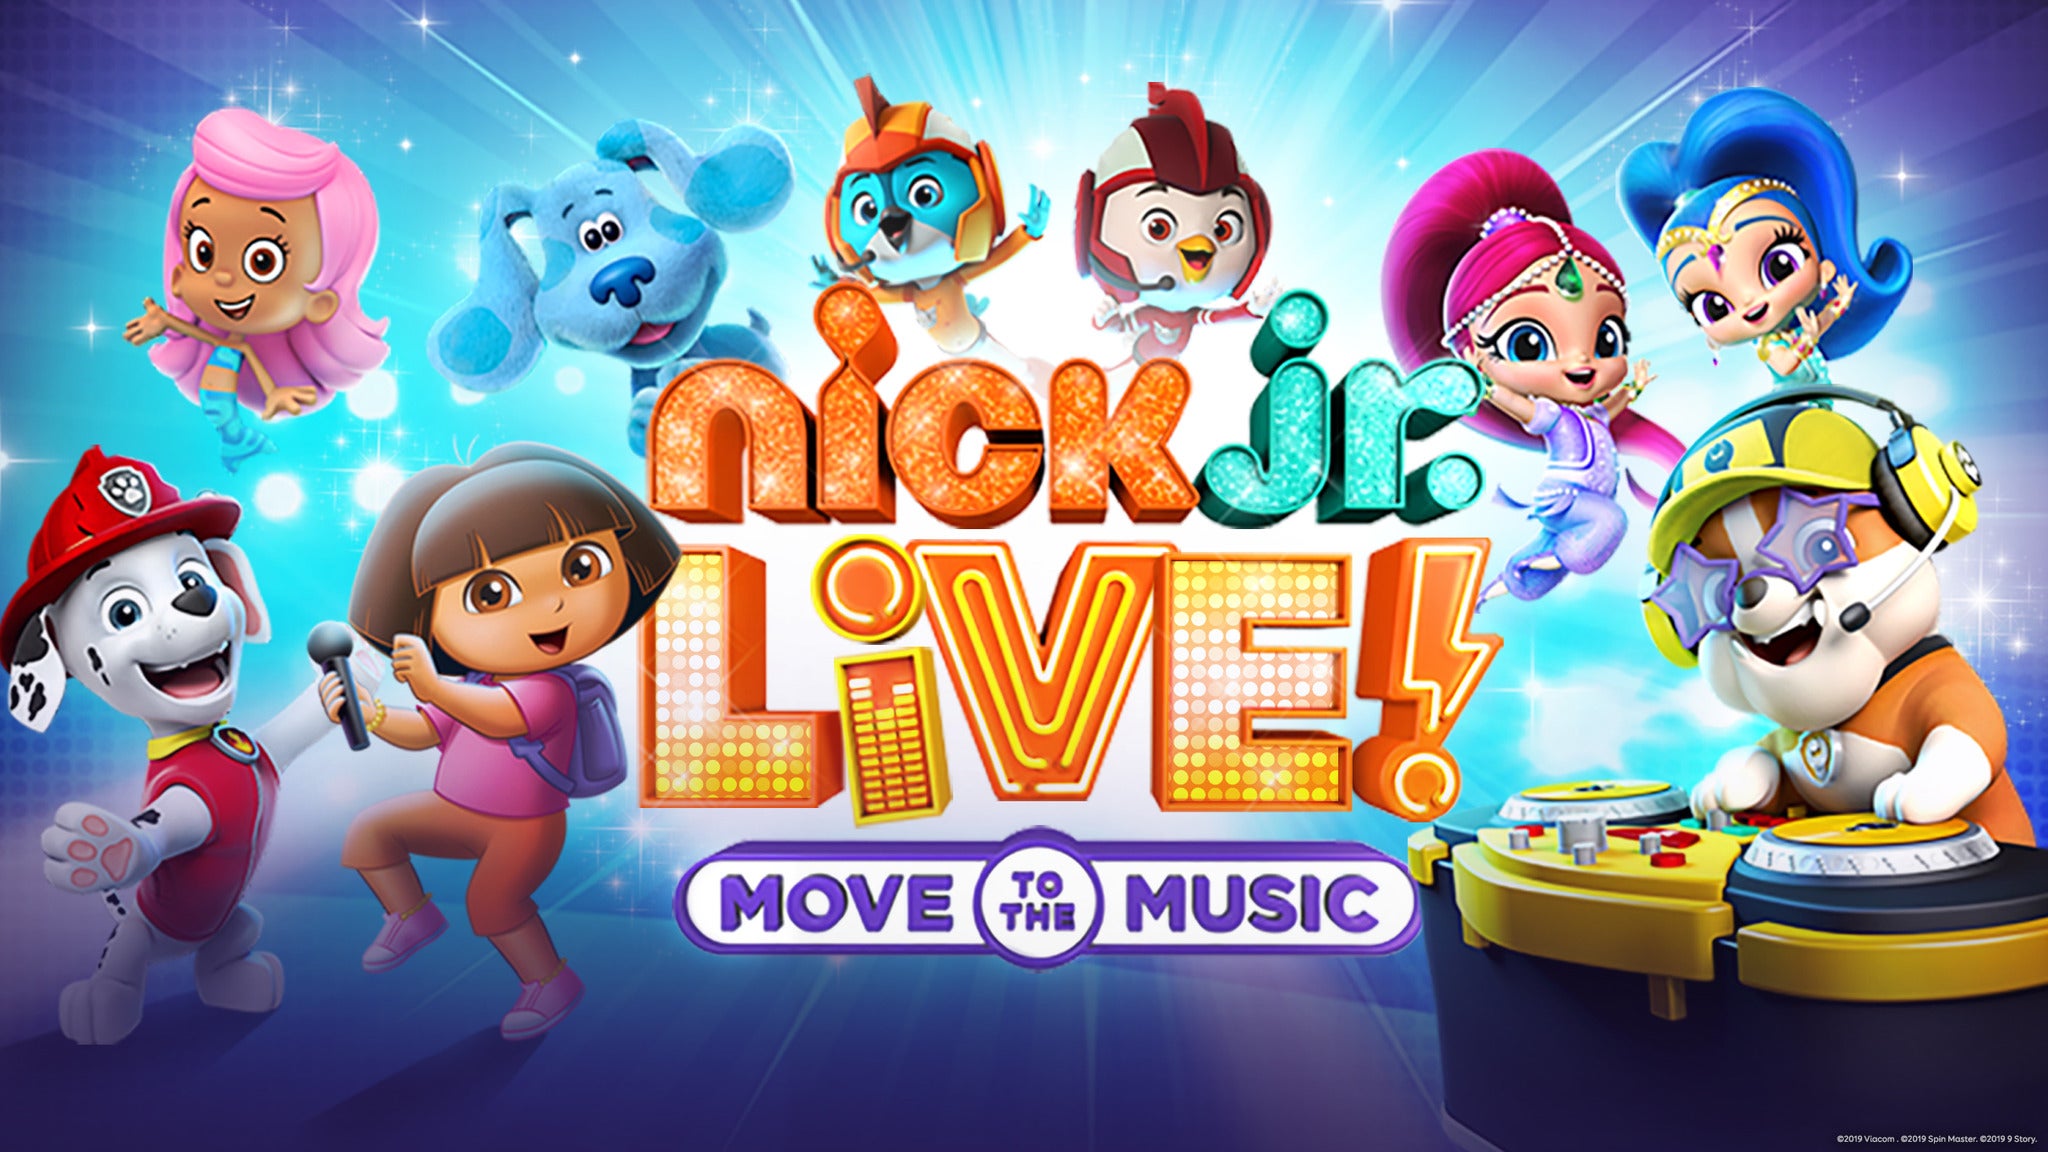 Nick Jr. Live! Move to the Music in Hollywood promo photo for Ticketmaster presale offer code